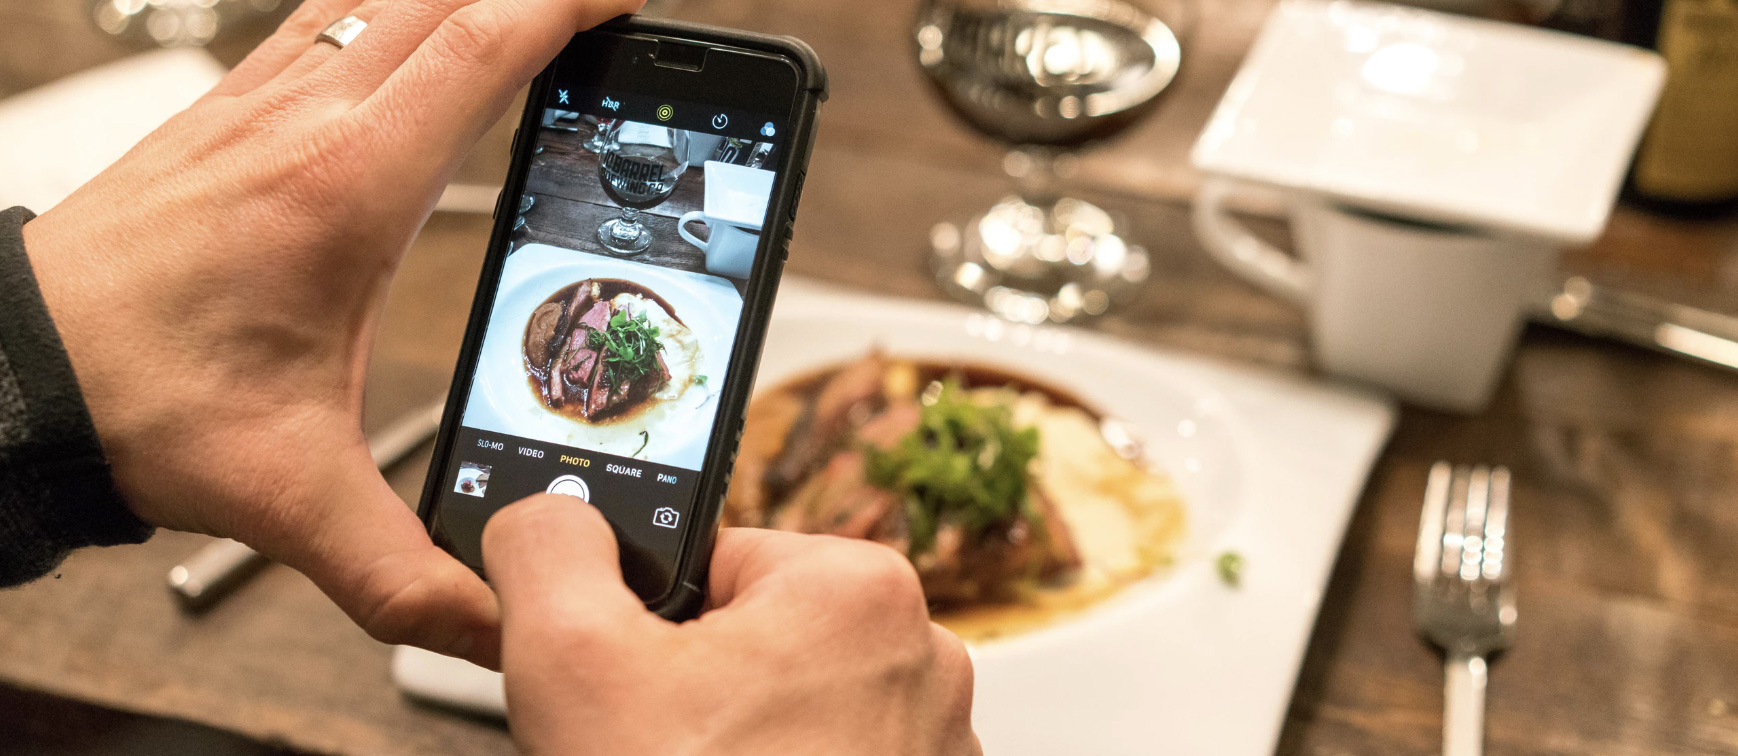 Taking photo of food with a phone